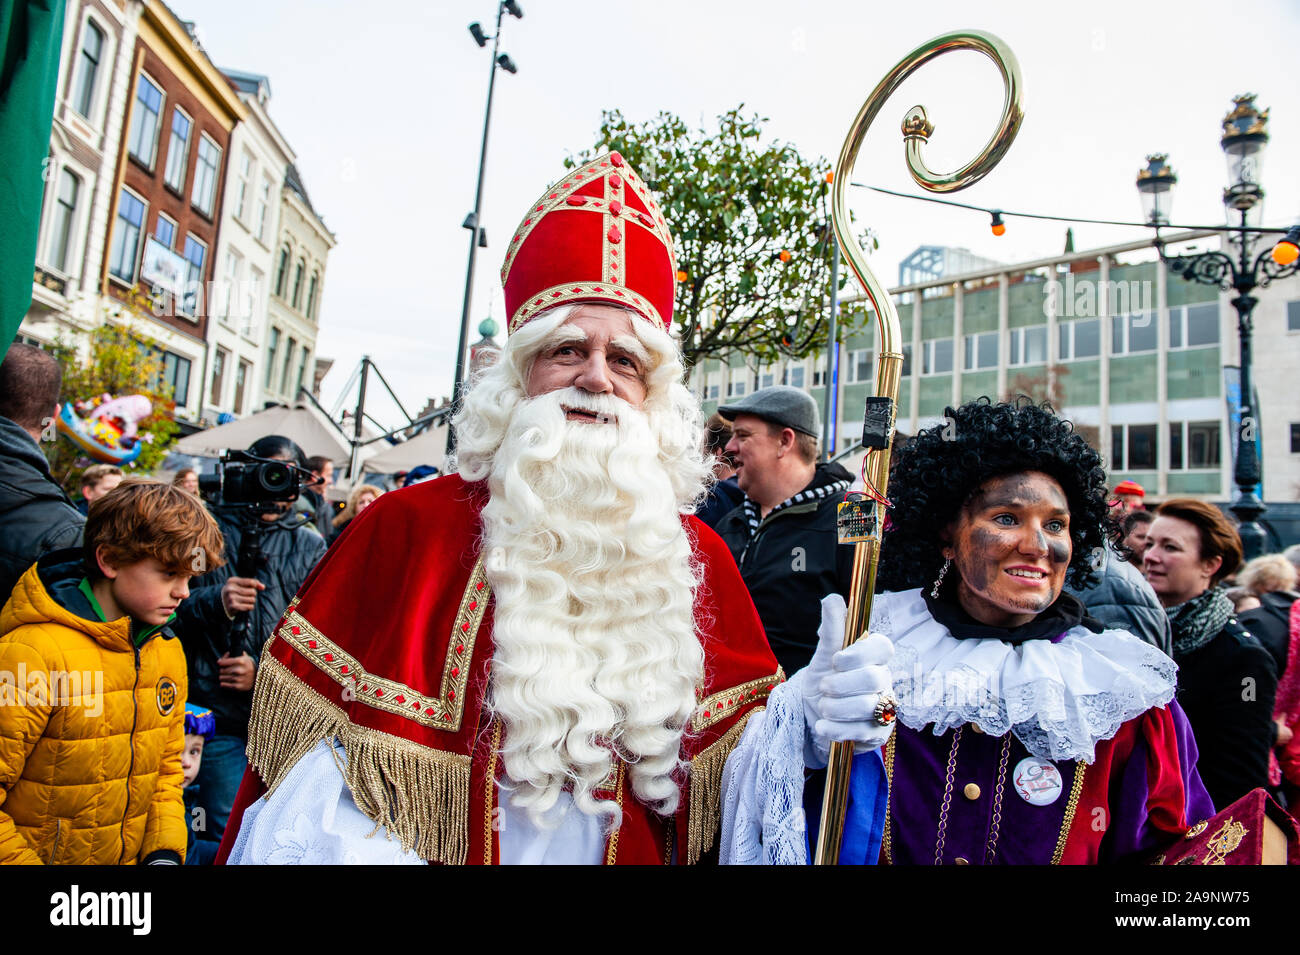 Sinterklaas arriving at the centre of the city during the event.Like each  year the first Saturday after November 11th, the red-and-white-clad  Sinterklaas (St. Nicholas) arrives with great fanfare to several Dutch  cities.